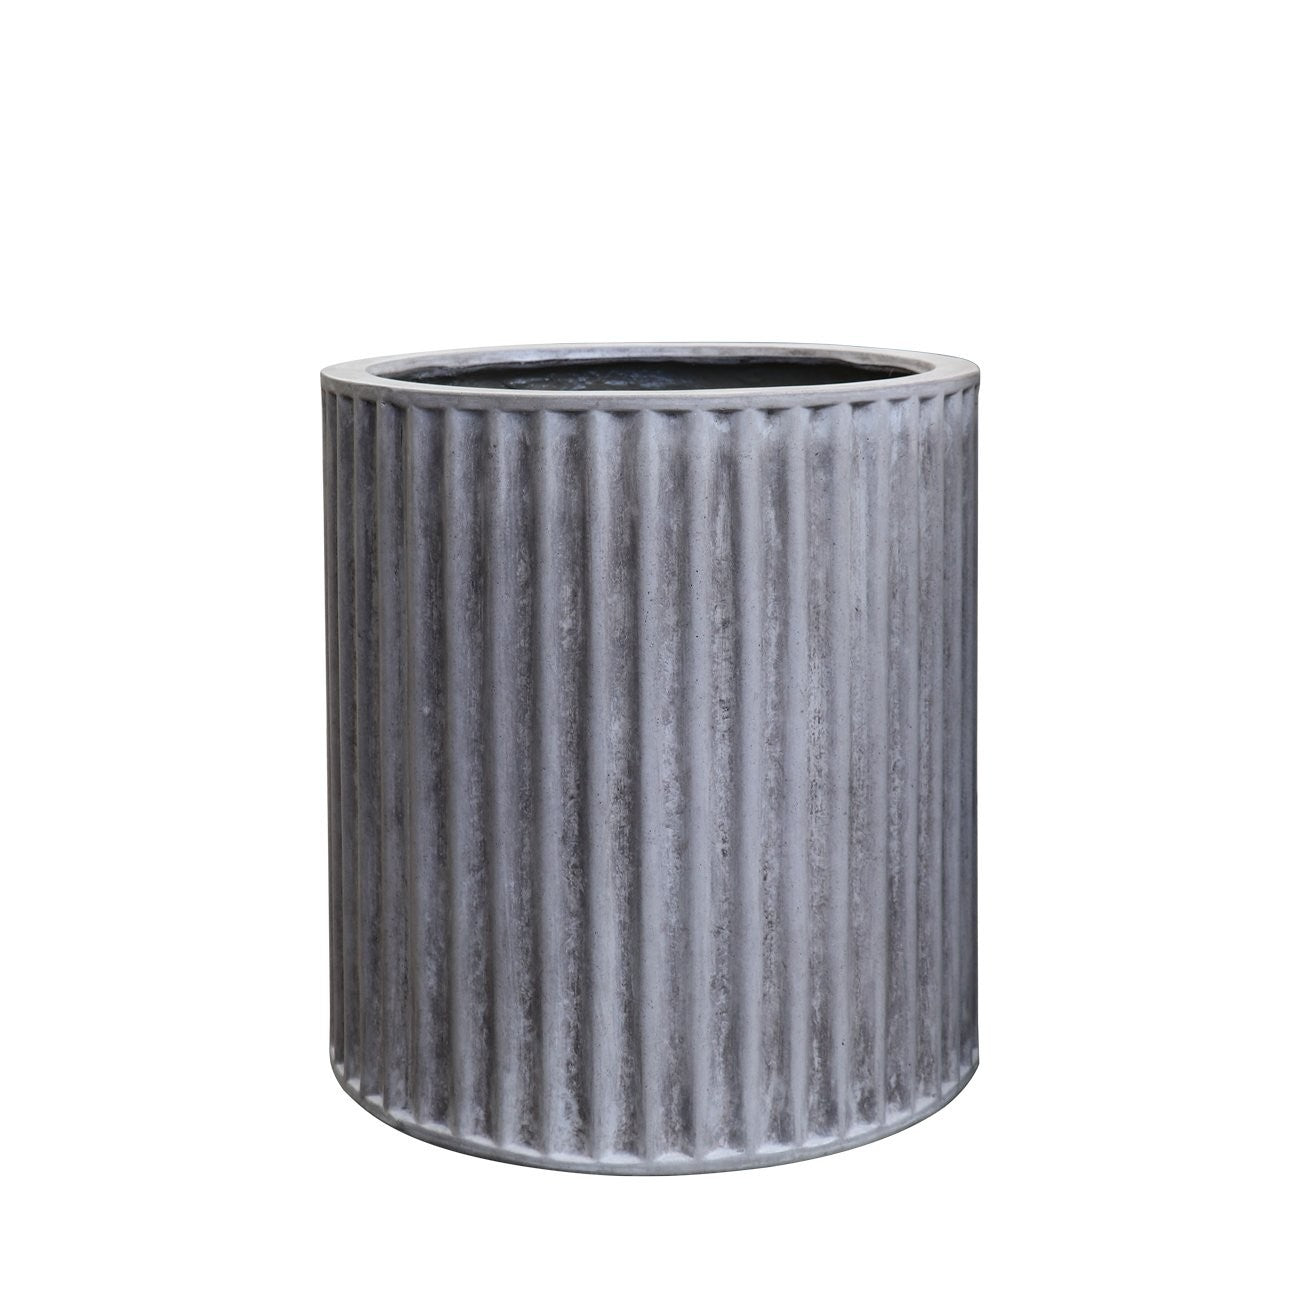 Piako Ribbed Cylinder Outdoor Planter - Weathered Cement (3 Sizes)